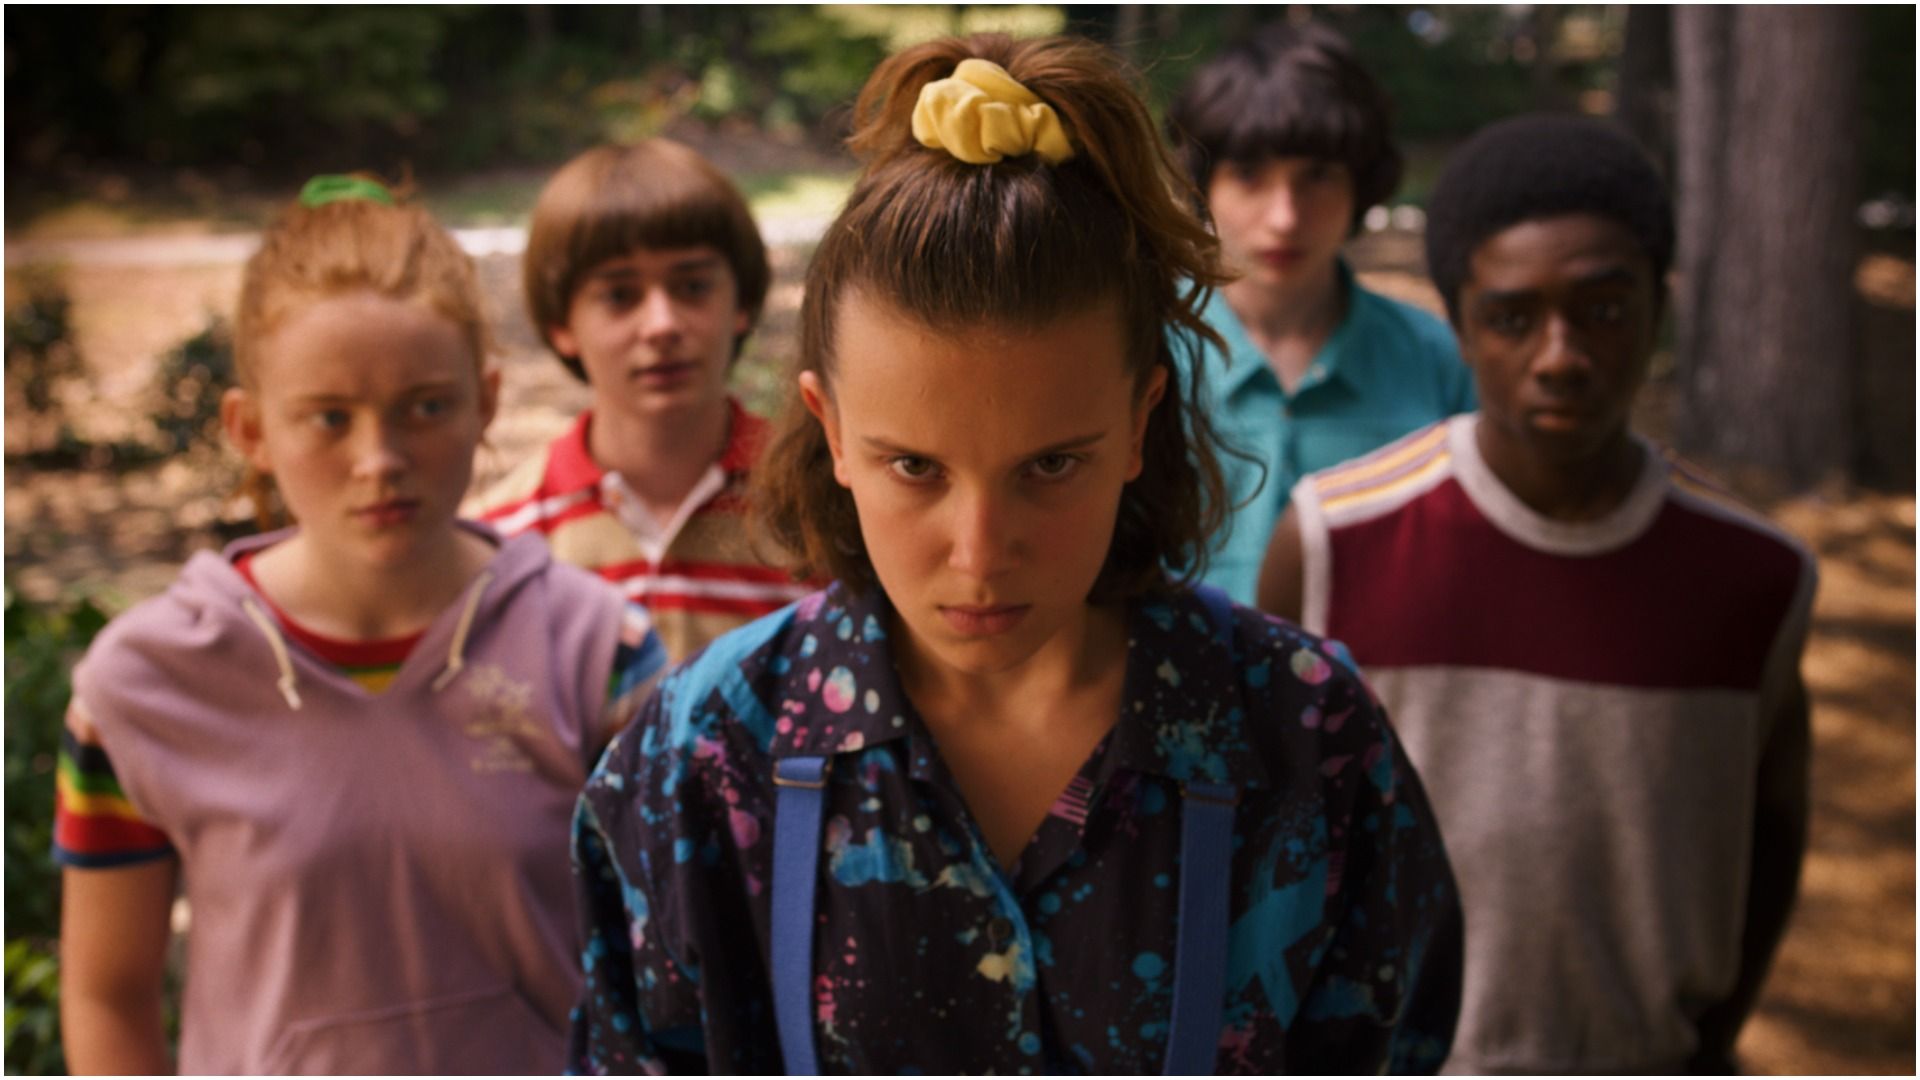 Stranger Things star Millie Bobby Brown gives us the lowdown